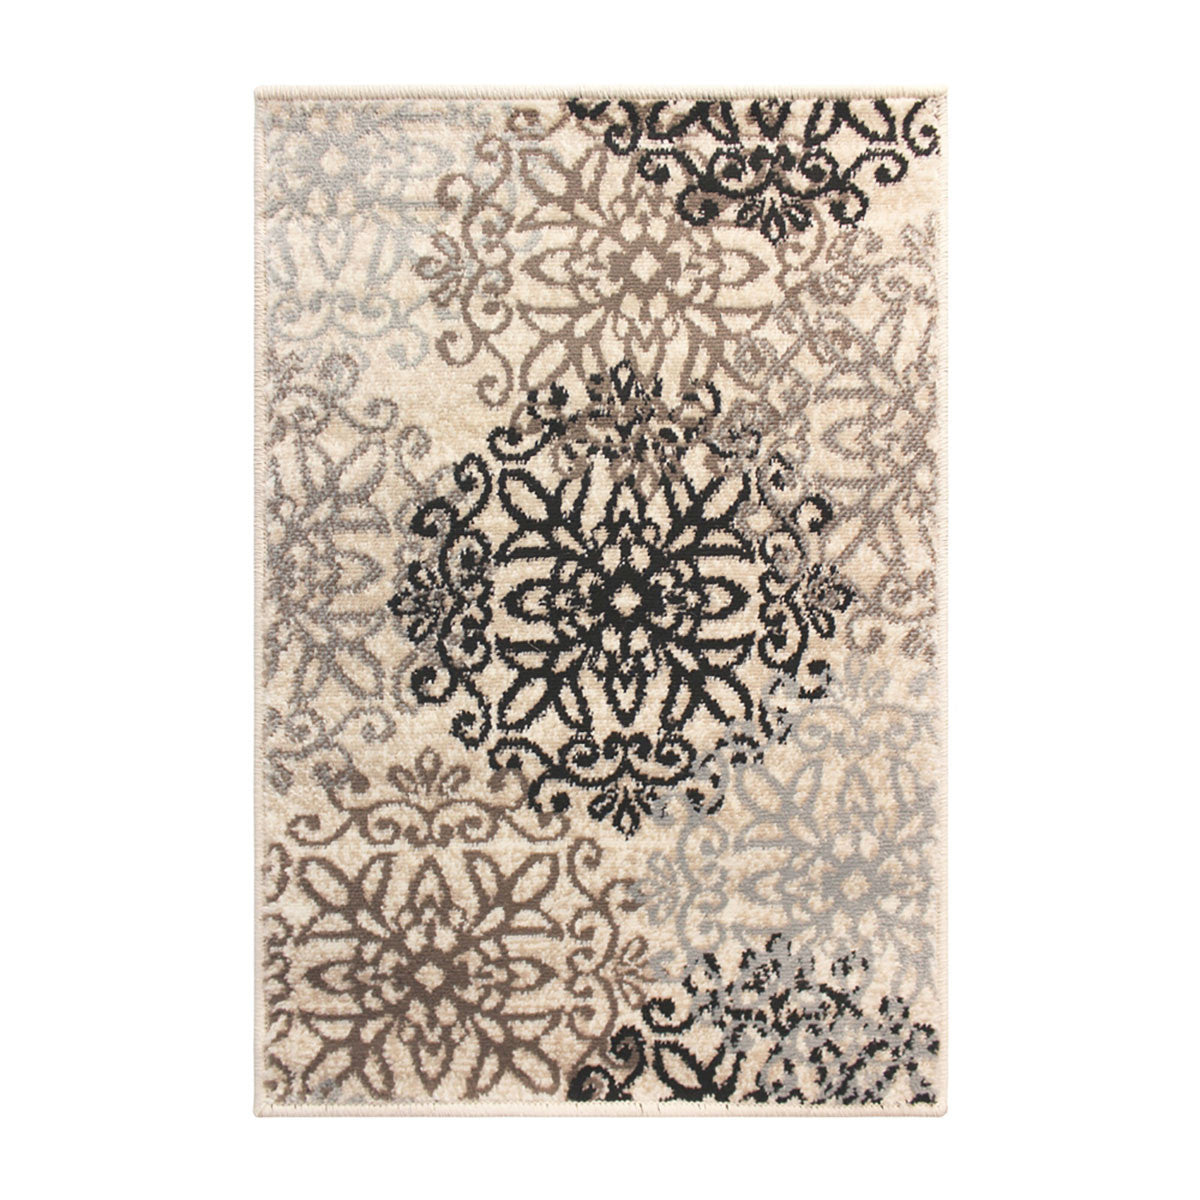 7' X 9' Tan Gray And Black Floral Medallion Stain Resistant Area Rug